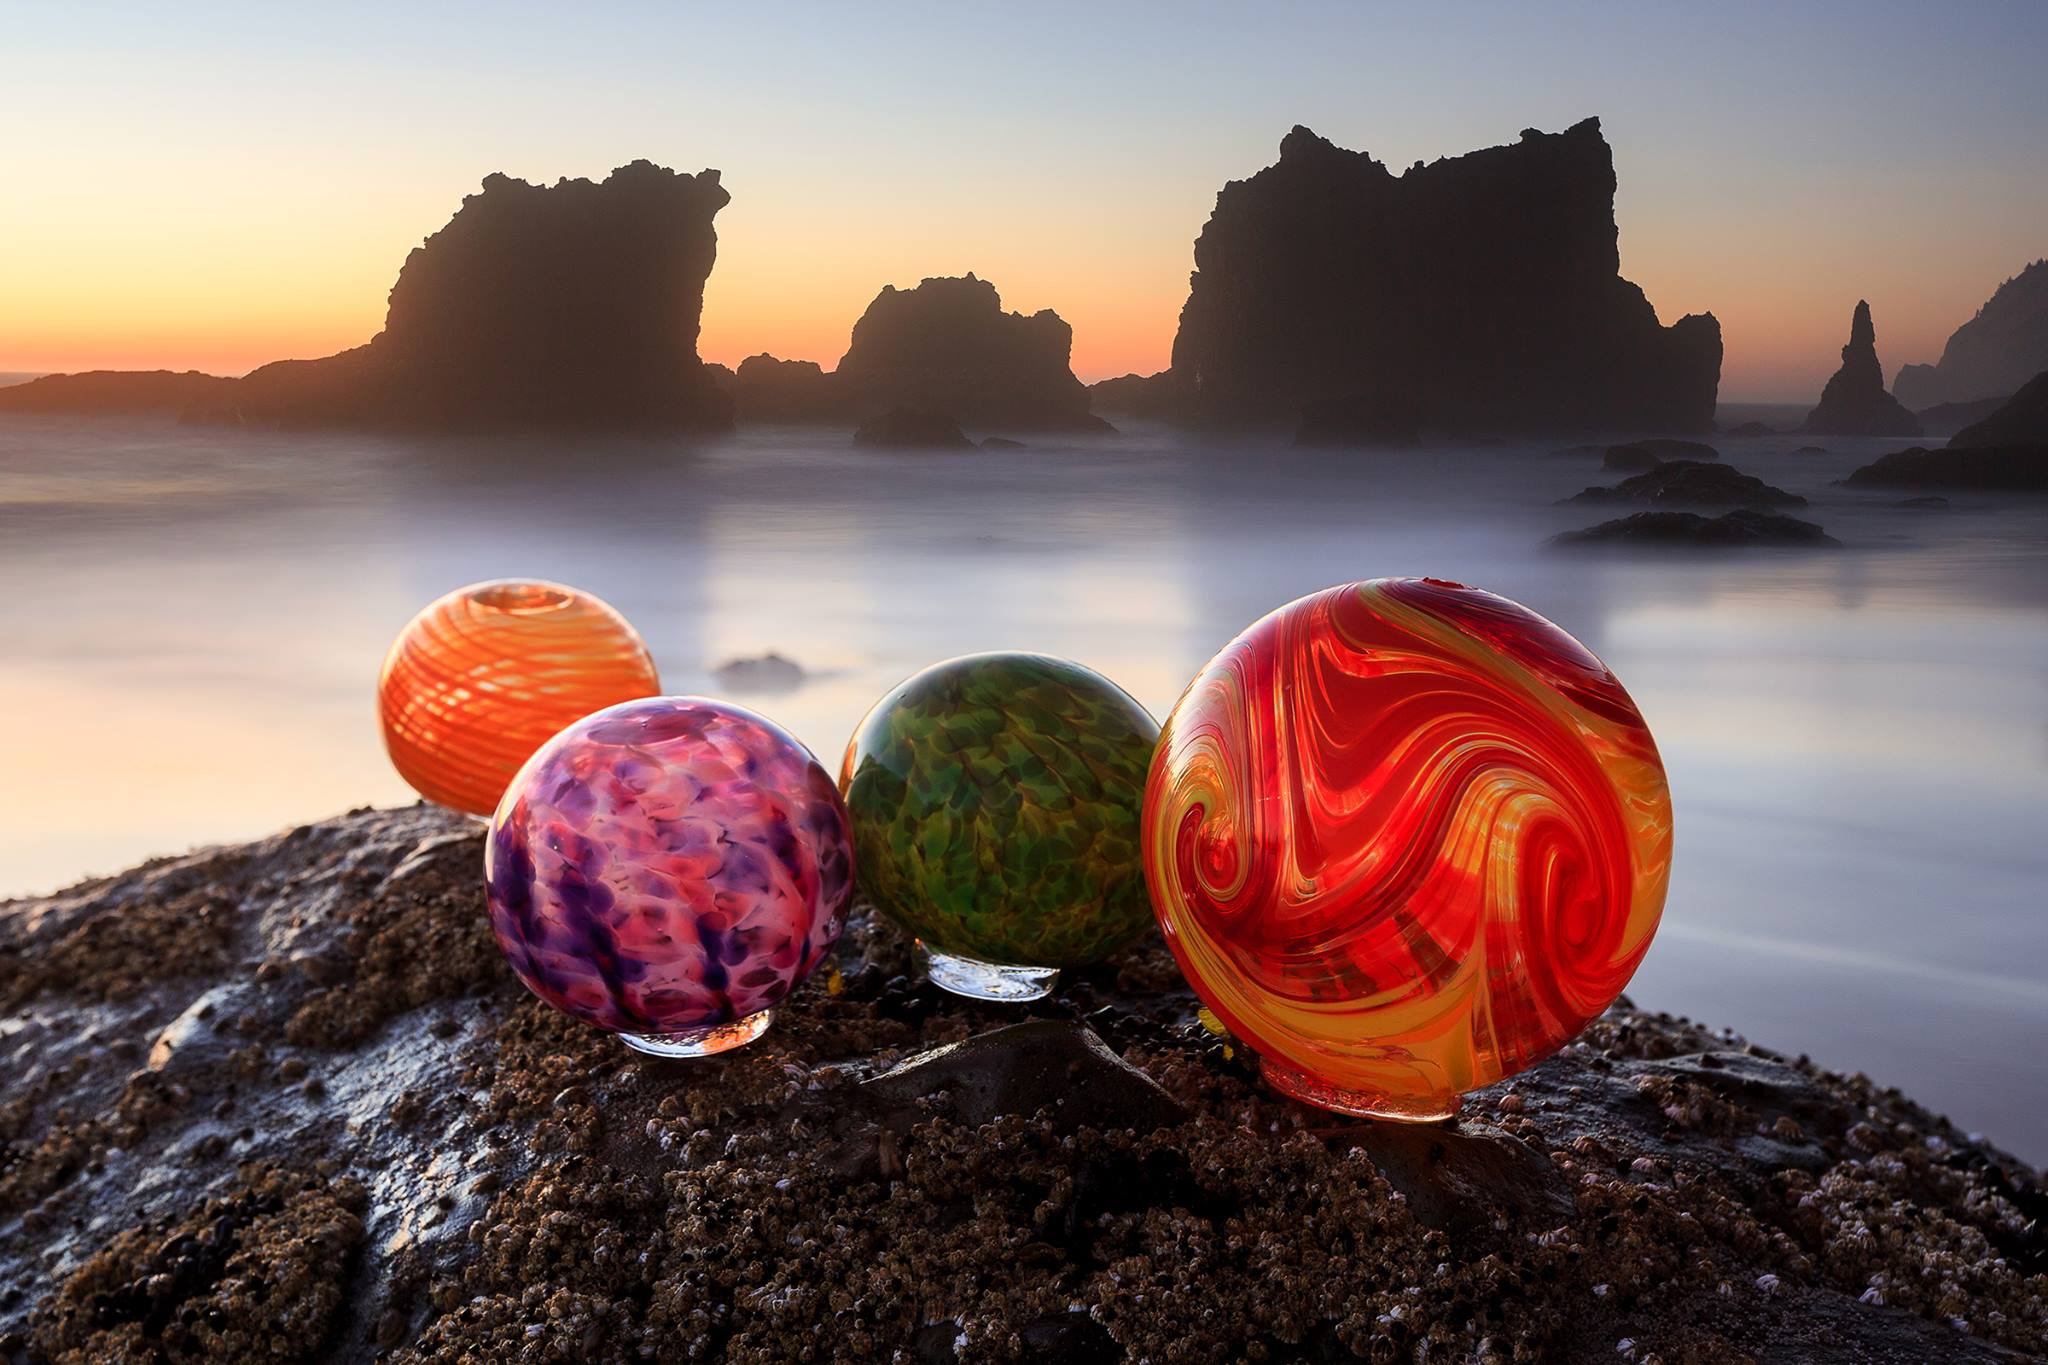 200 More Glass Floats to Hit Oregon Beaches for Spring Break